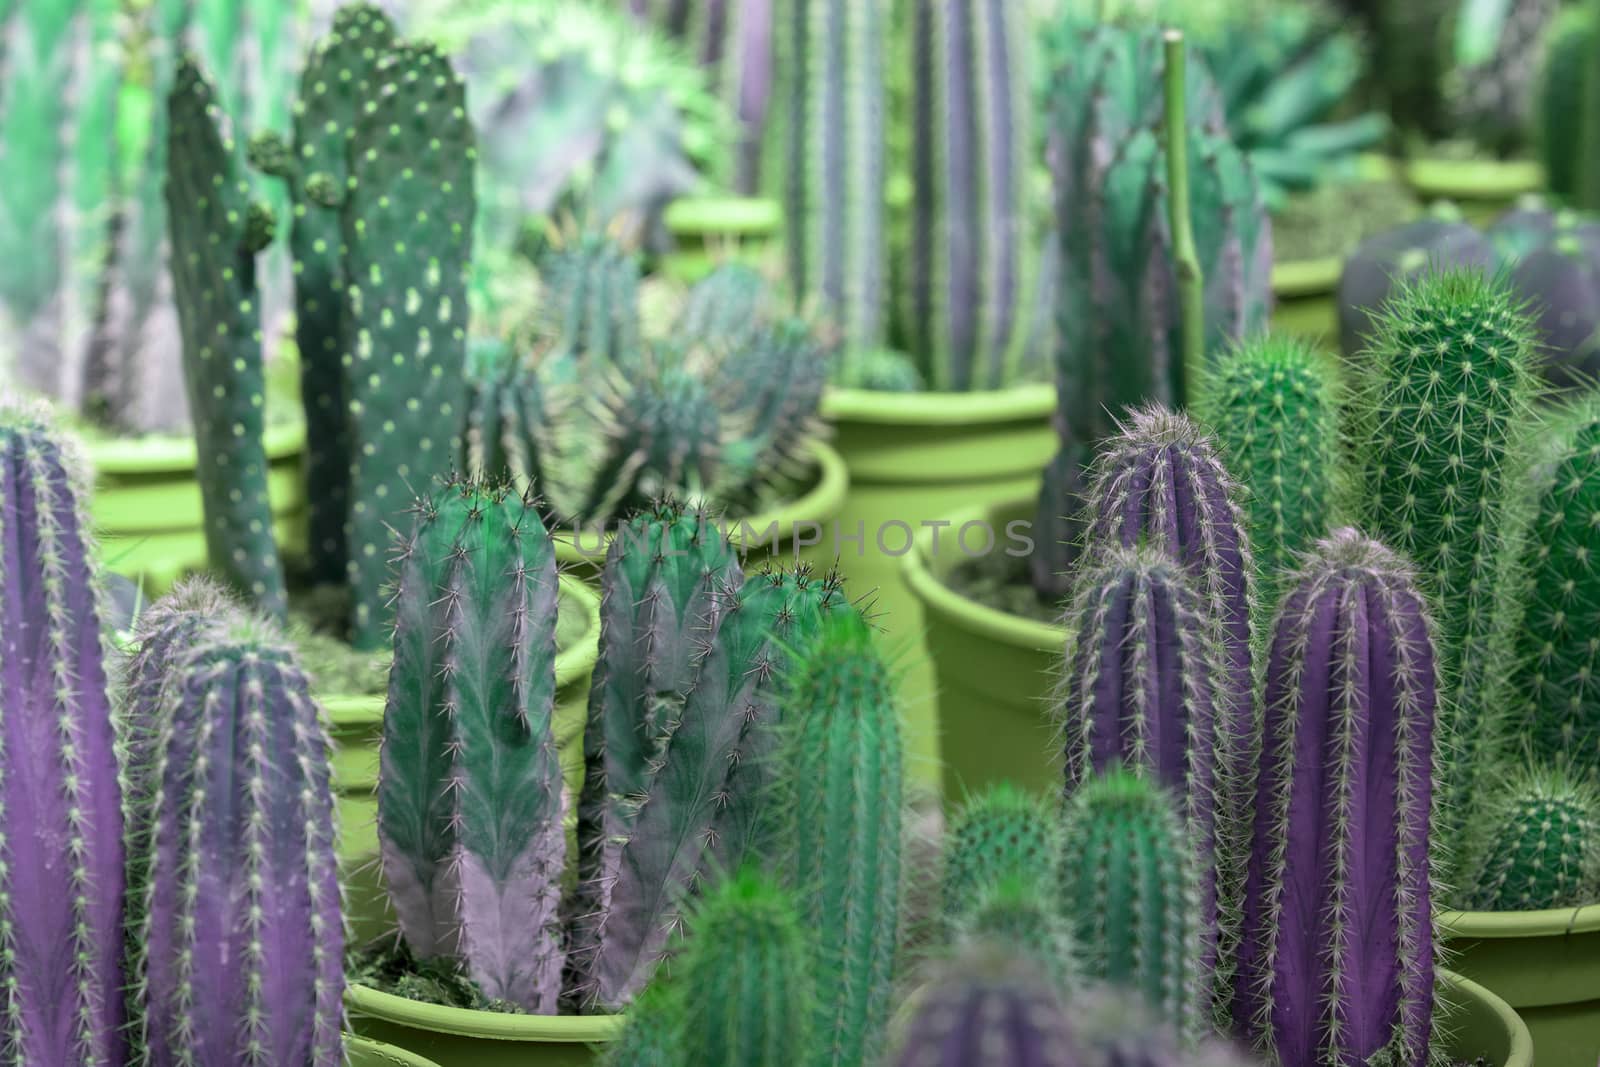 Abstract purple and green cactus plants in pots by ArtesiaWells